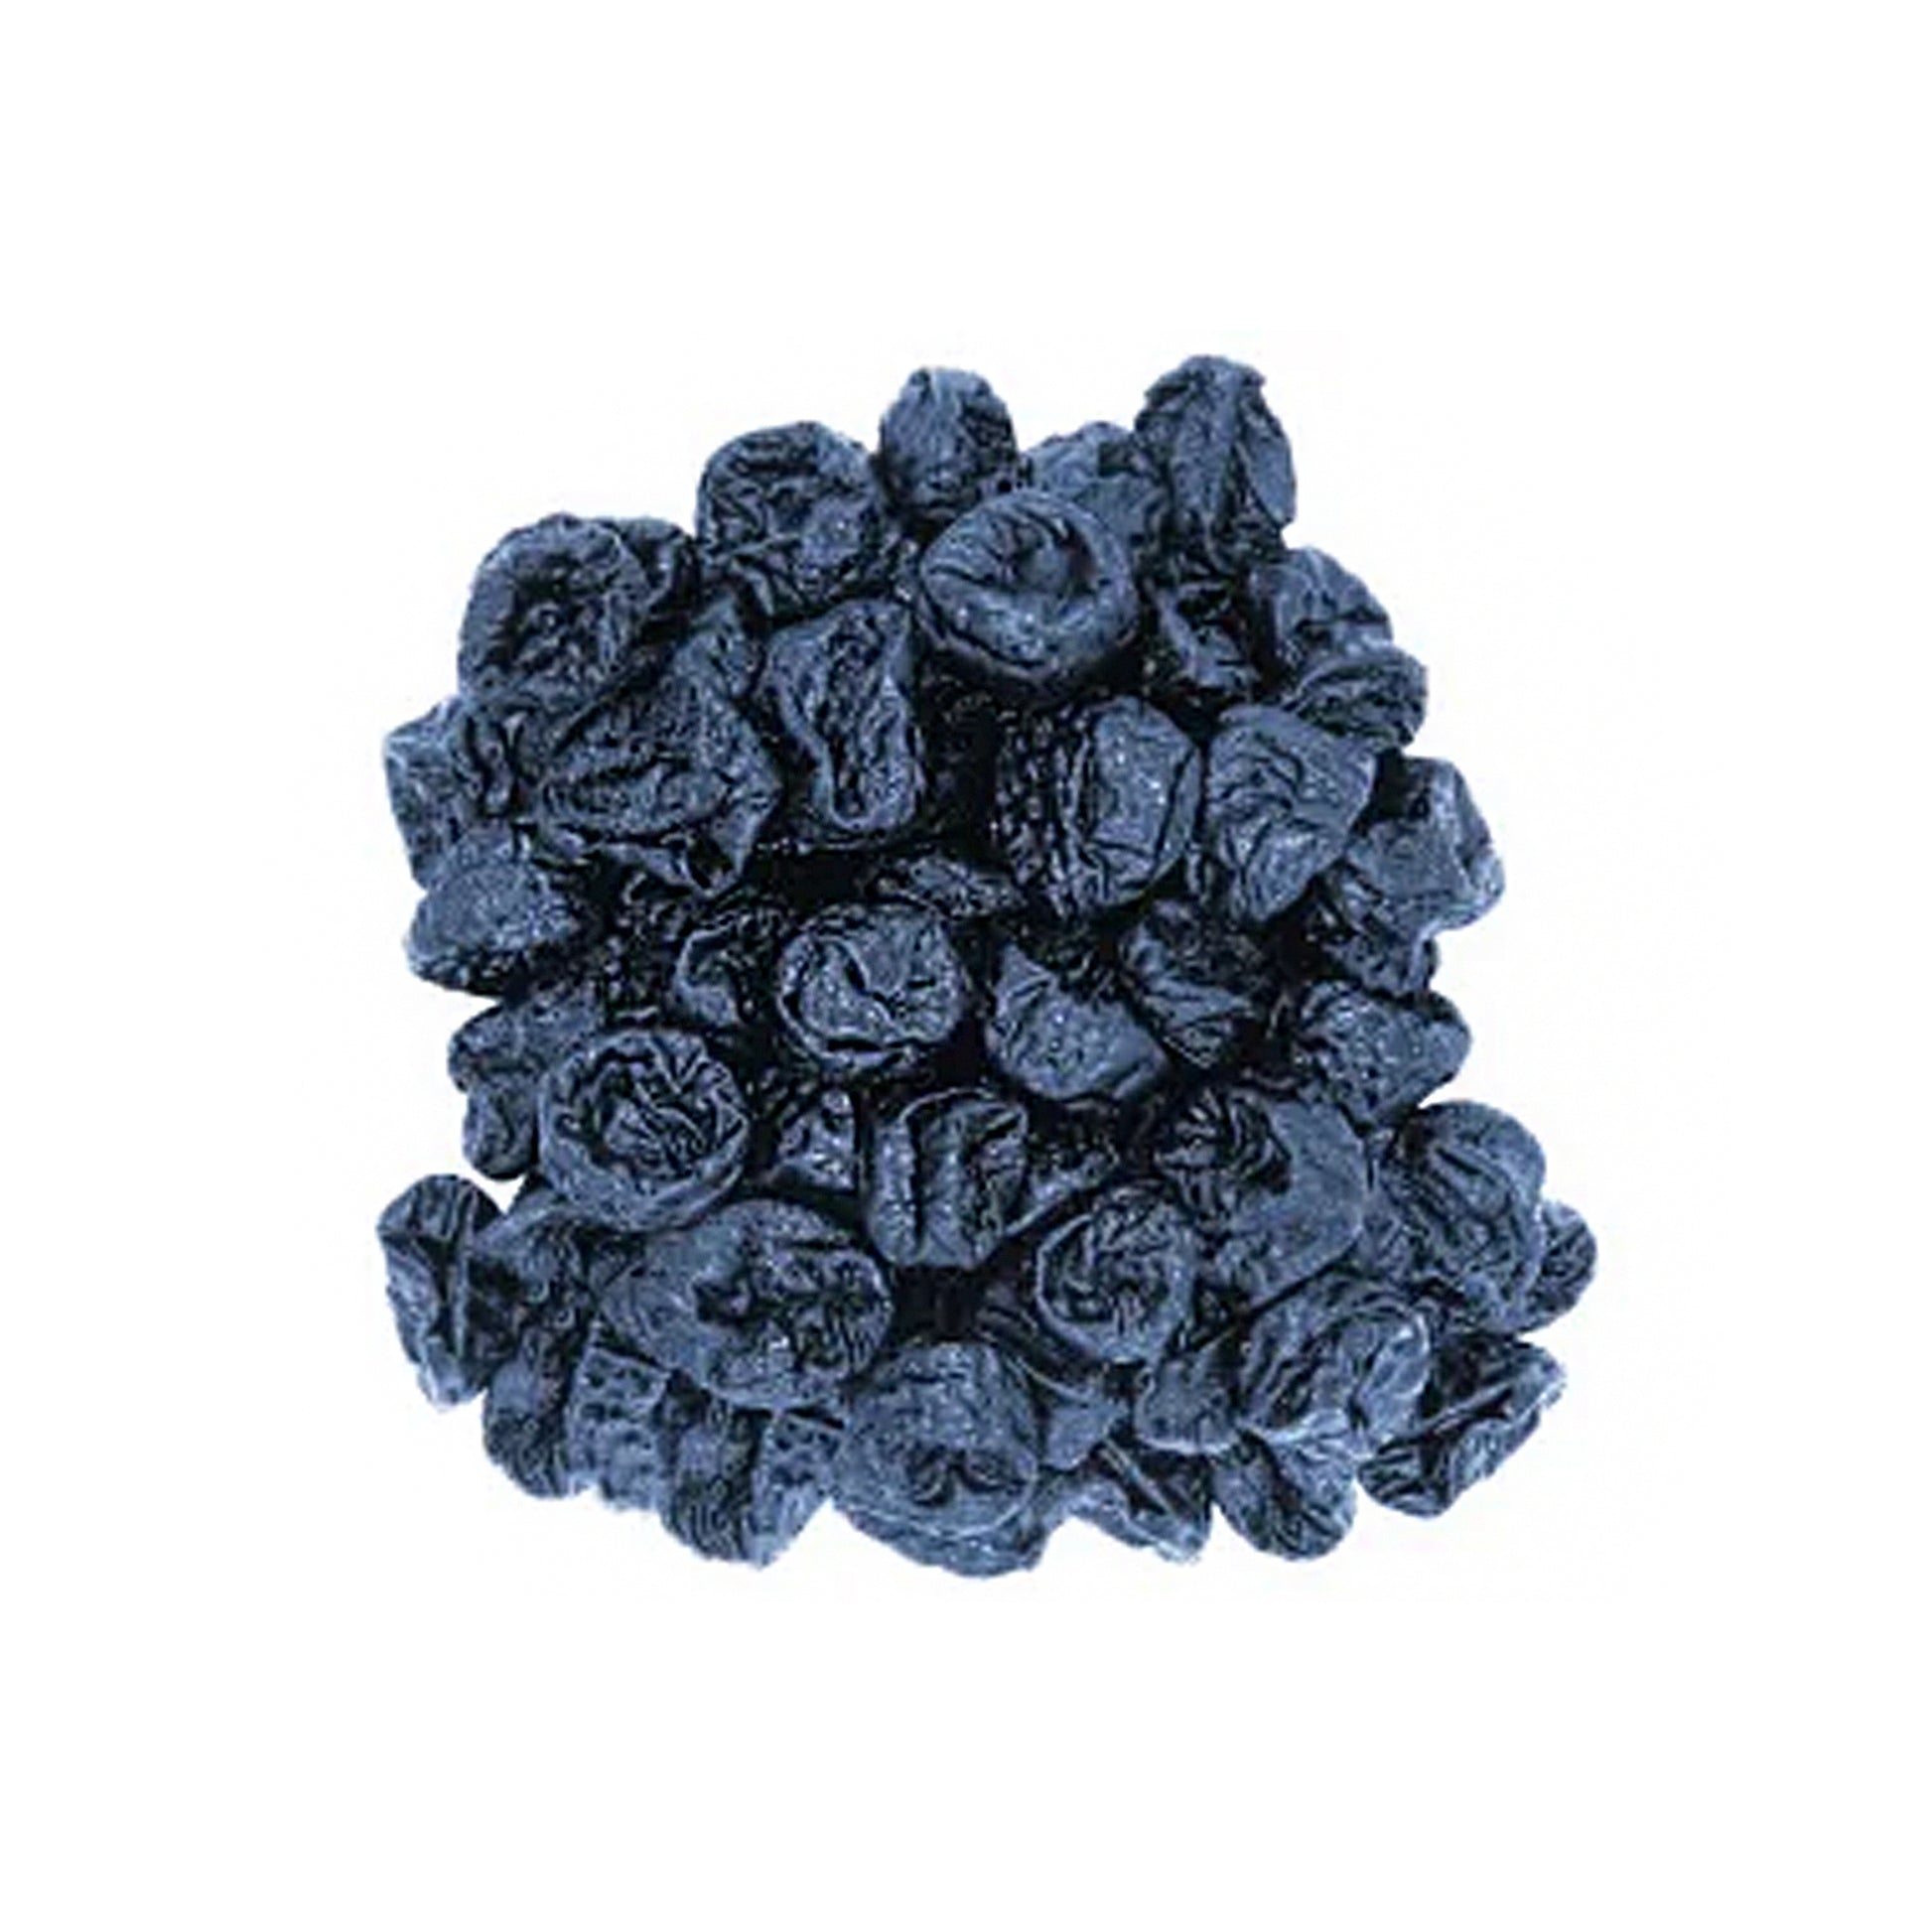 Organic Dried Plum - 0.22 lb: Enjoy the sweet and tangy flavor of our organic dried plums. Perfect for snacking or adding to your favorite recipes.